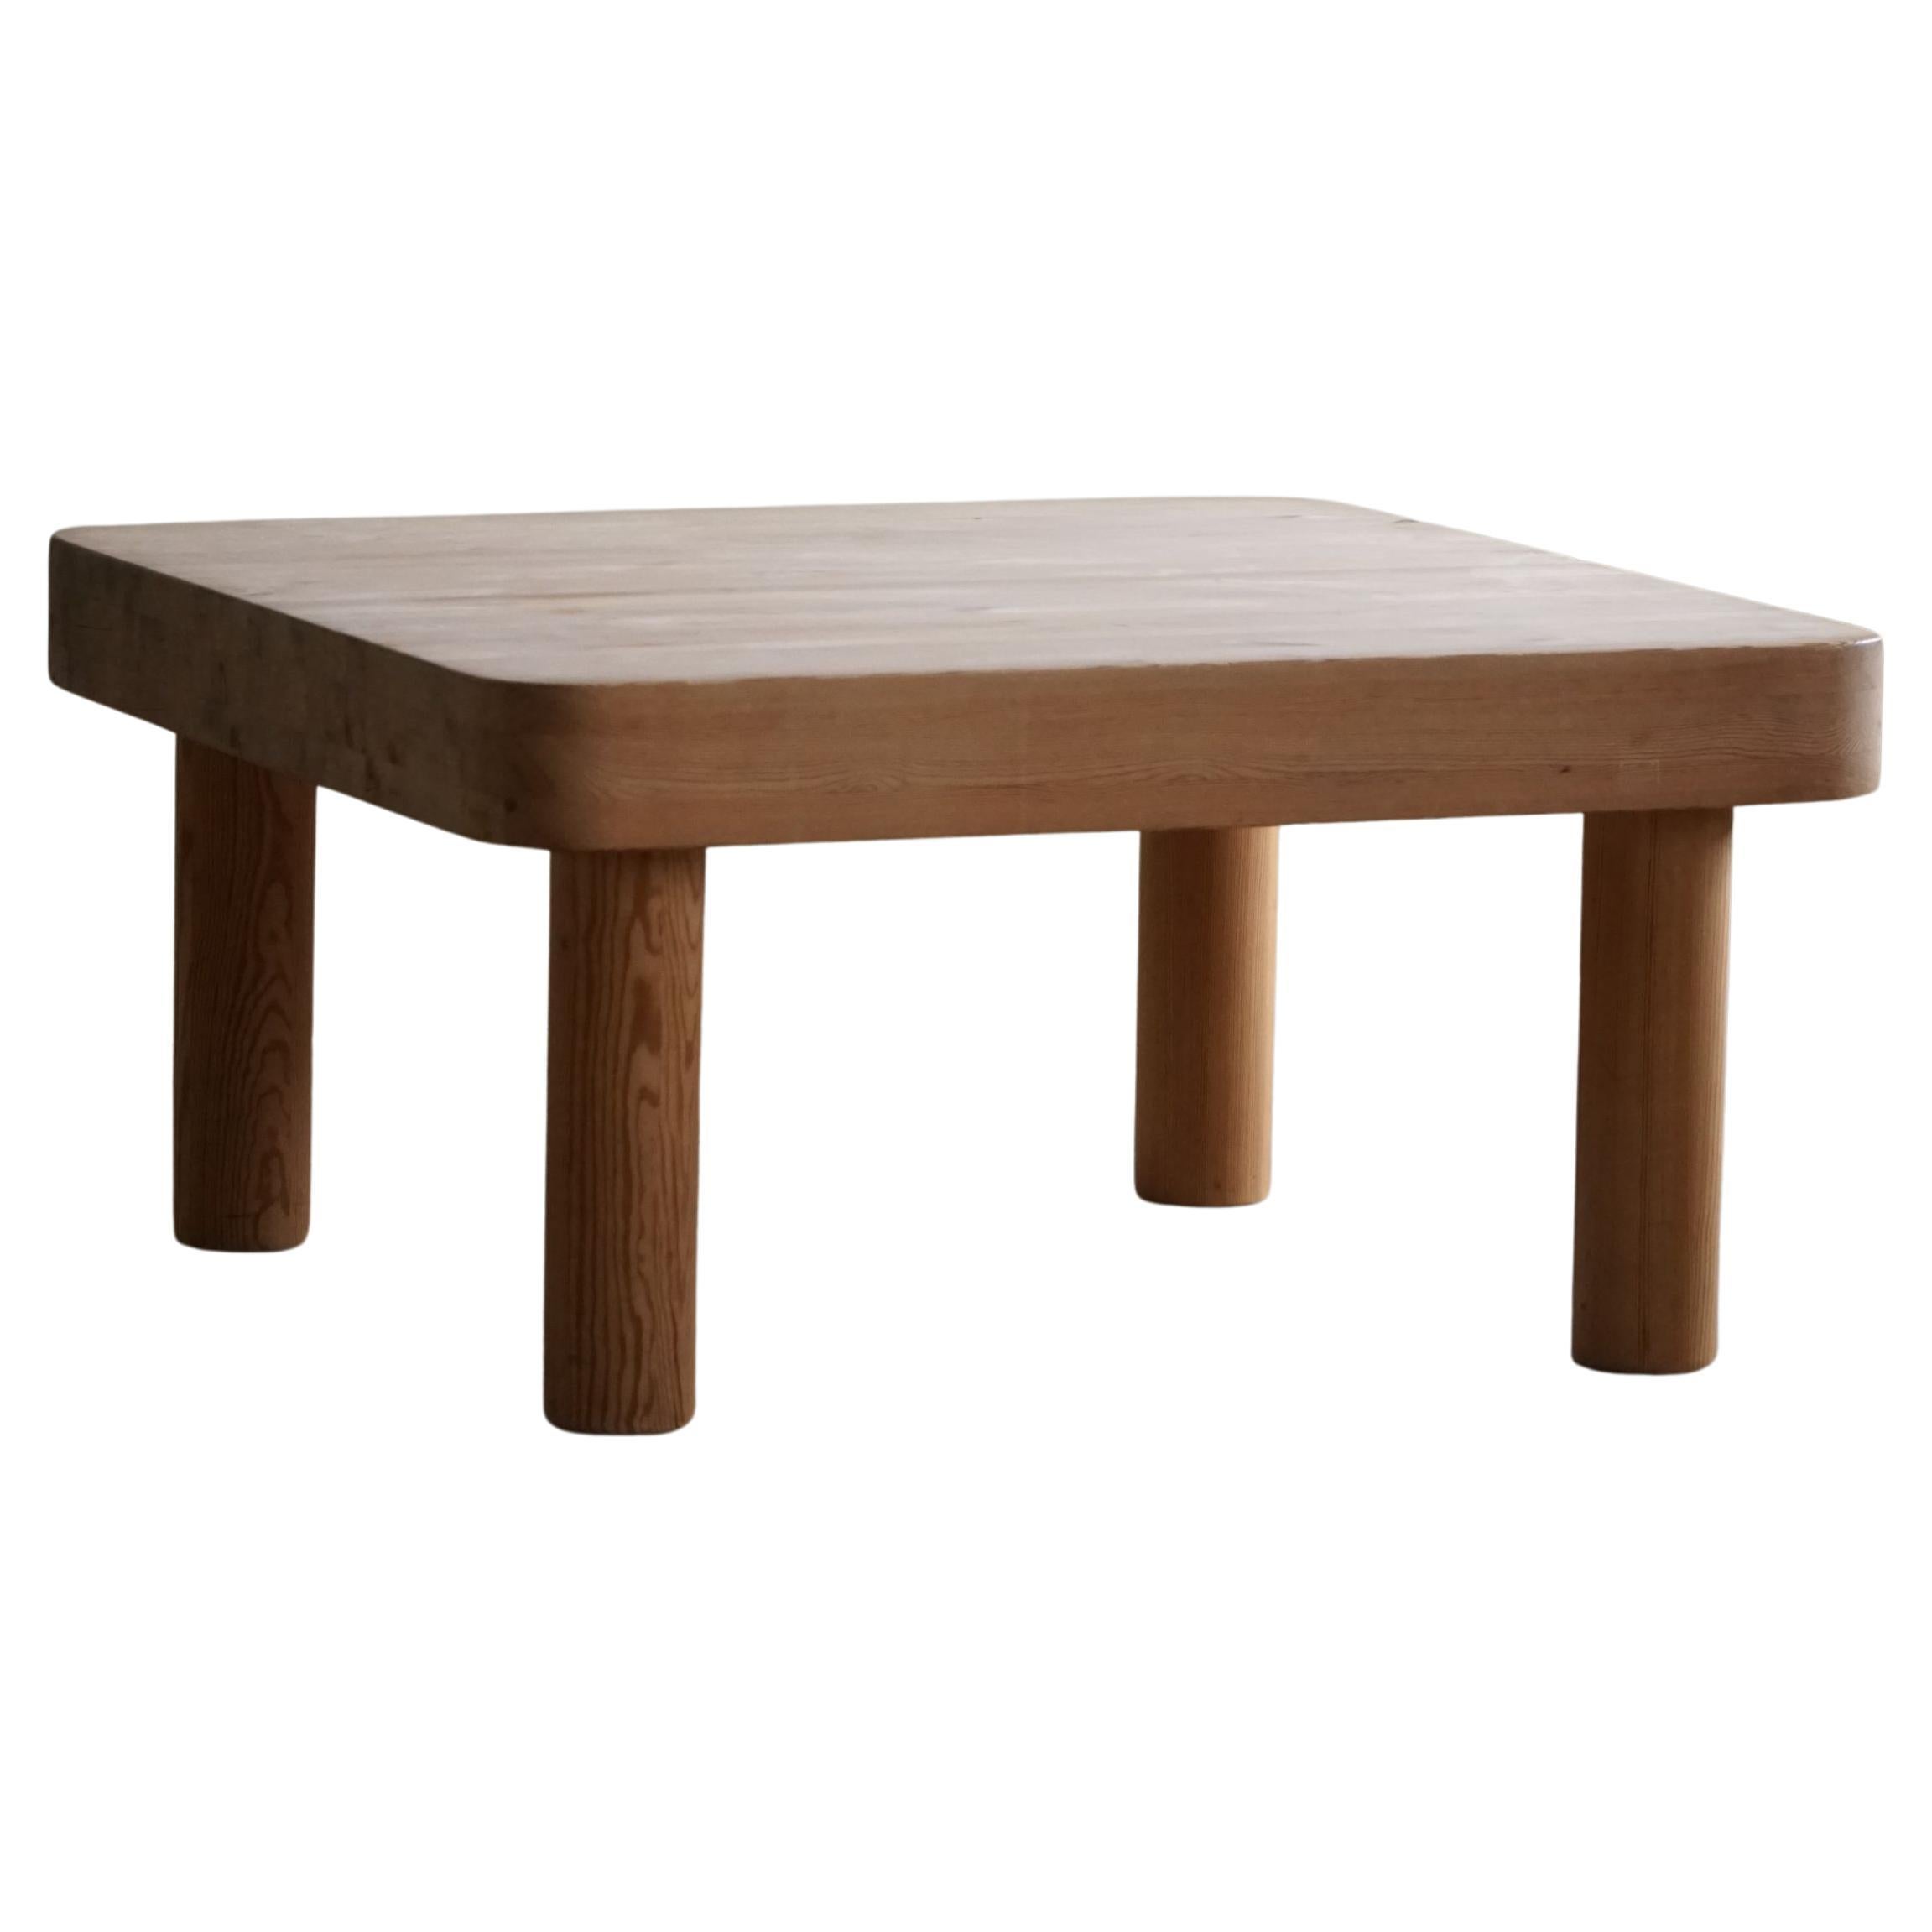 20th Century, Square in Pine with Chunky Legs by Rainer Daumiller, Danish Modern For Sale